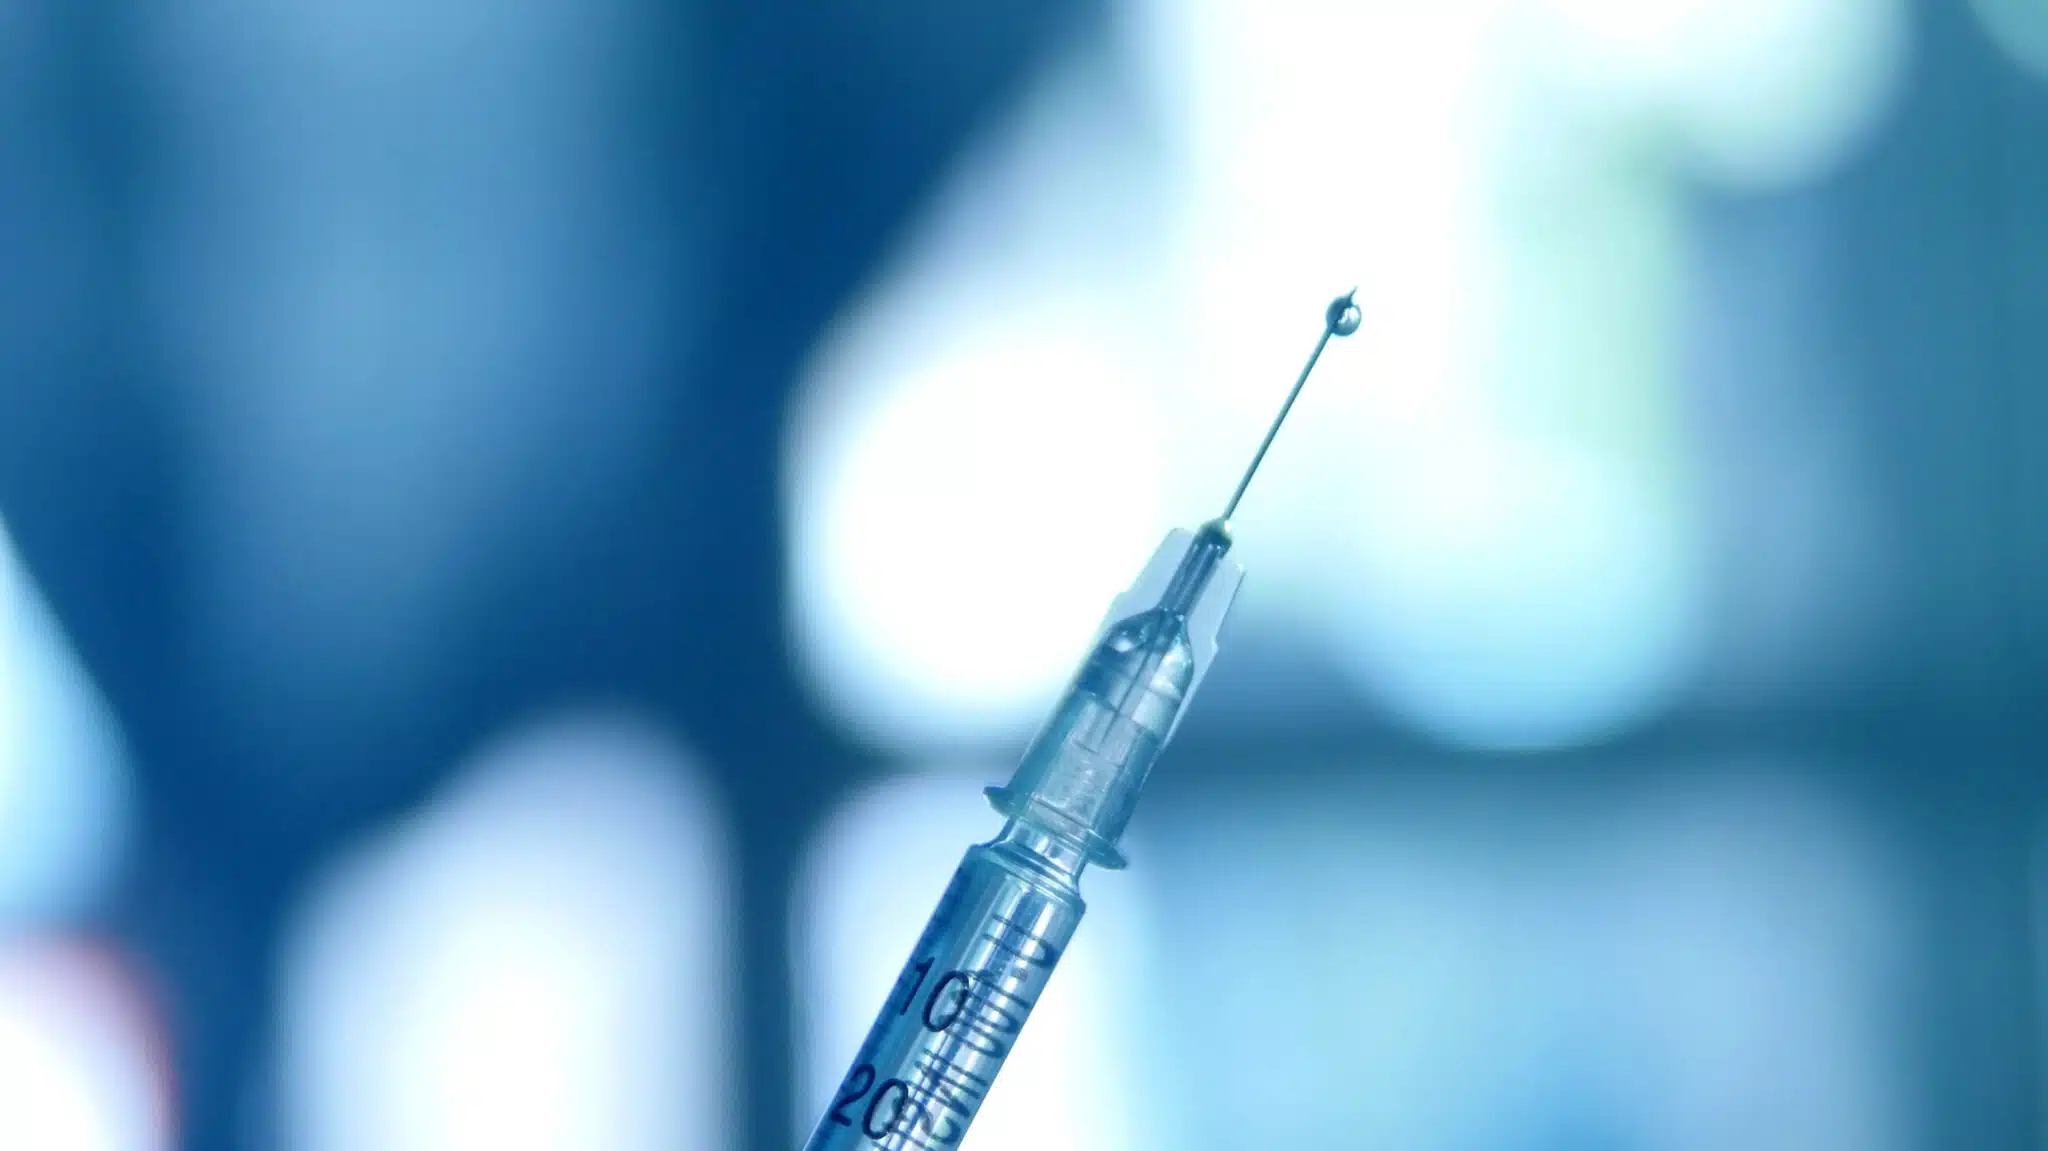 A close up on a needle with with a liquid droplet coming out - Common Health Complications From IV Drug Use